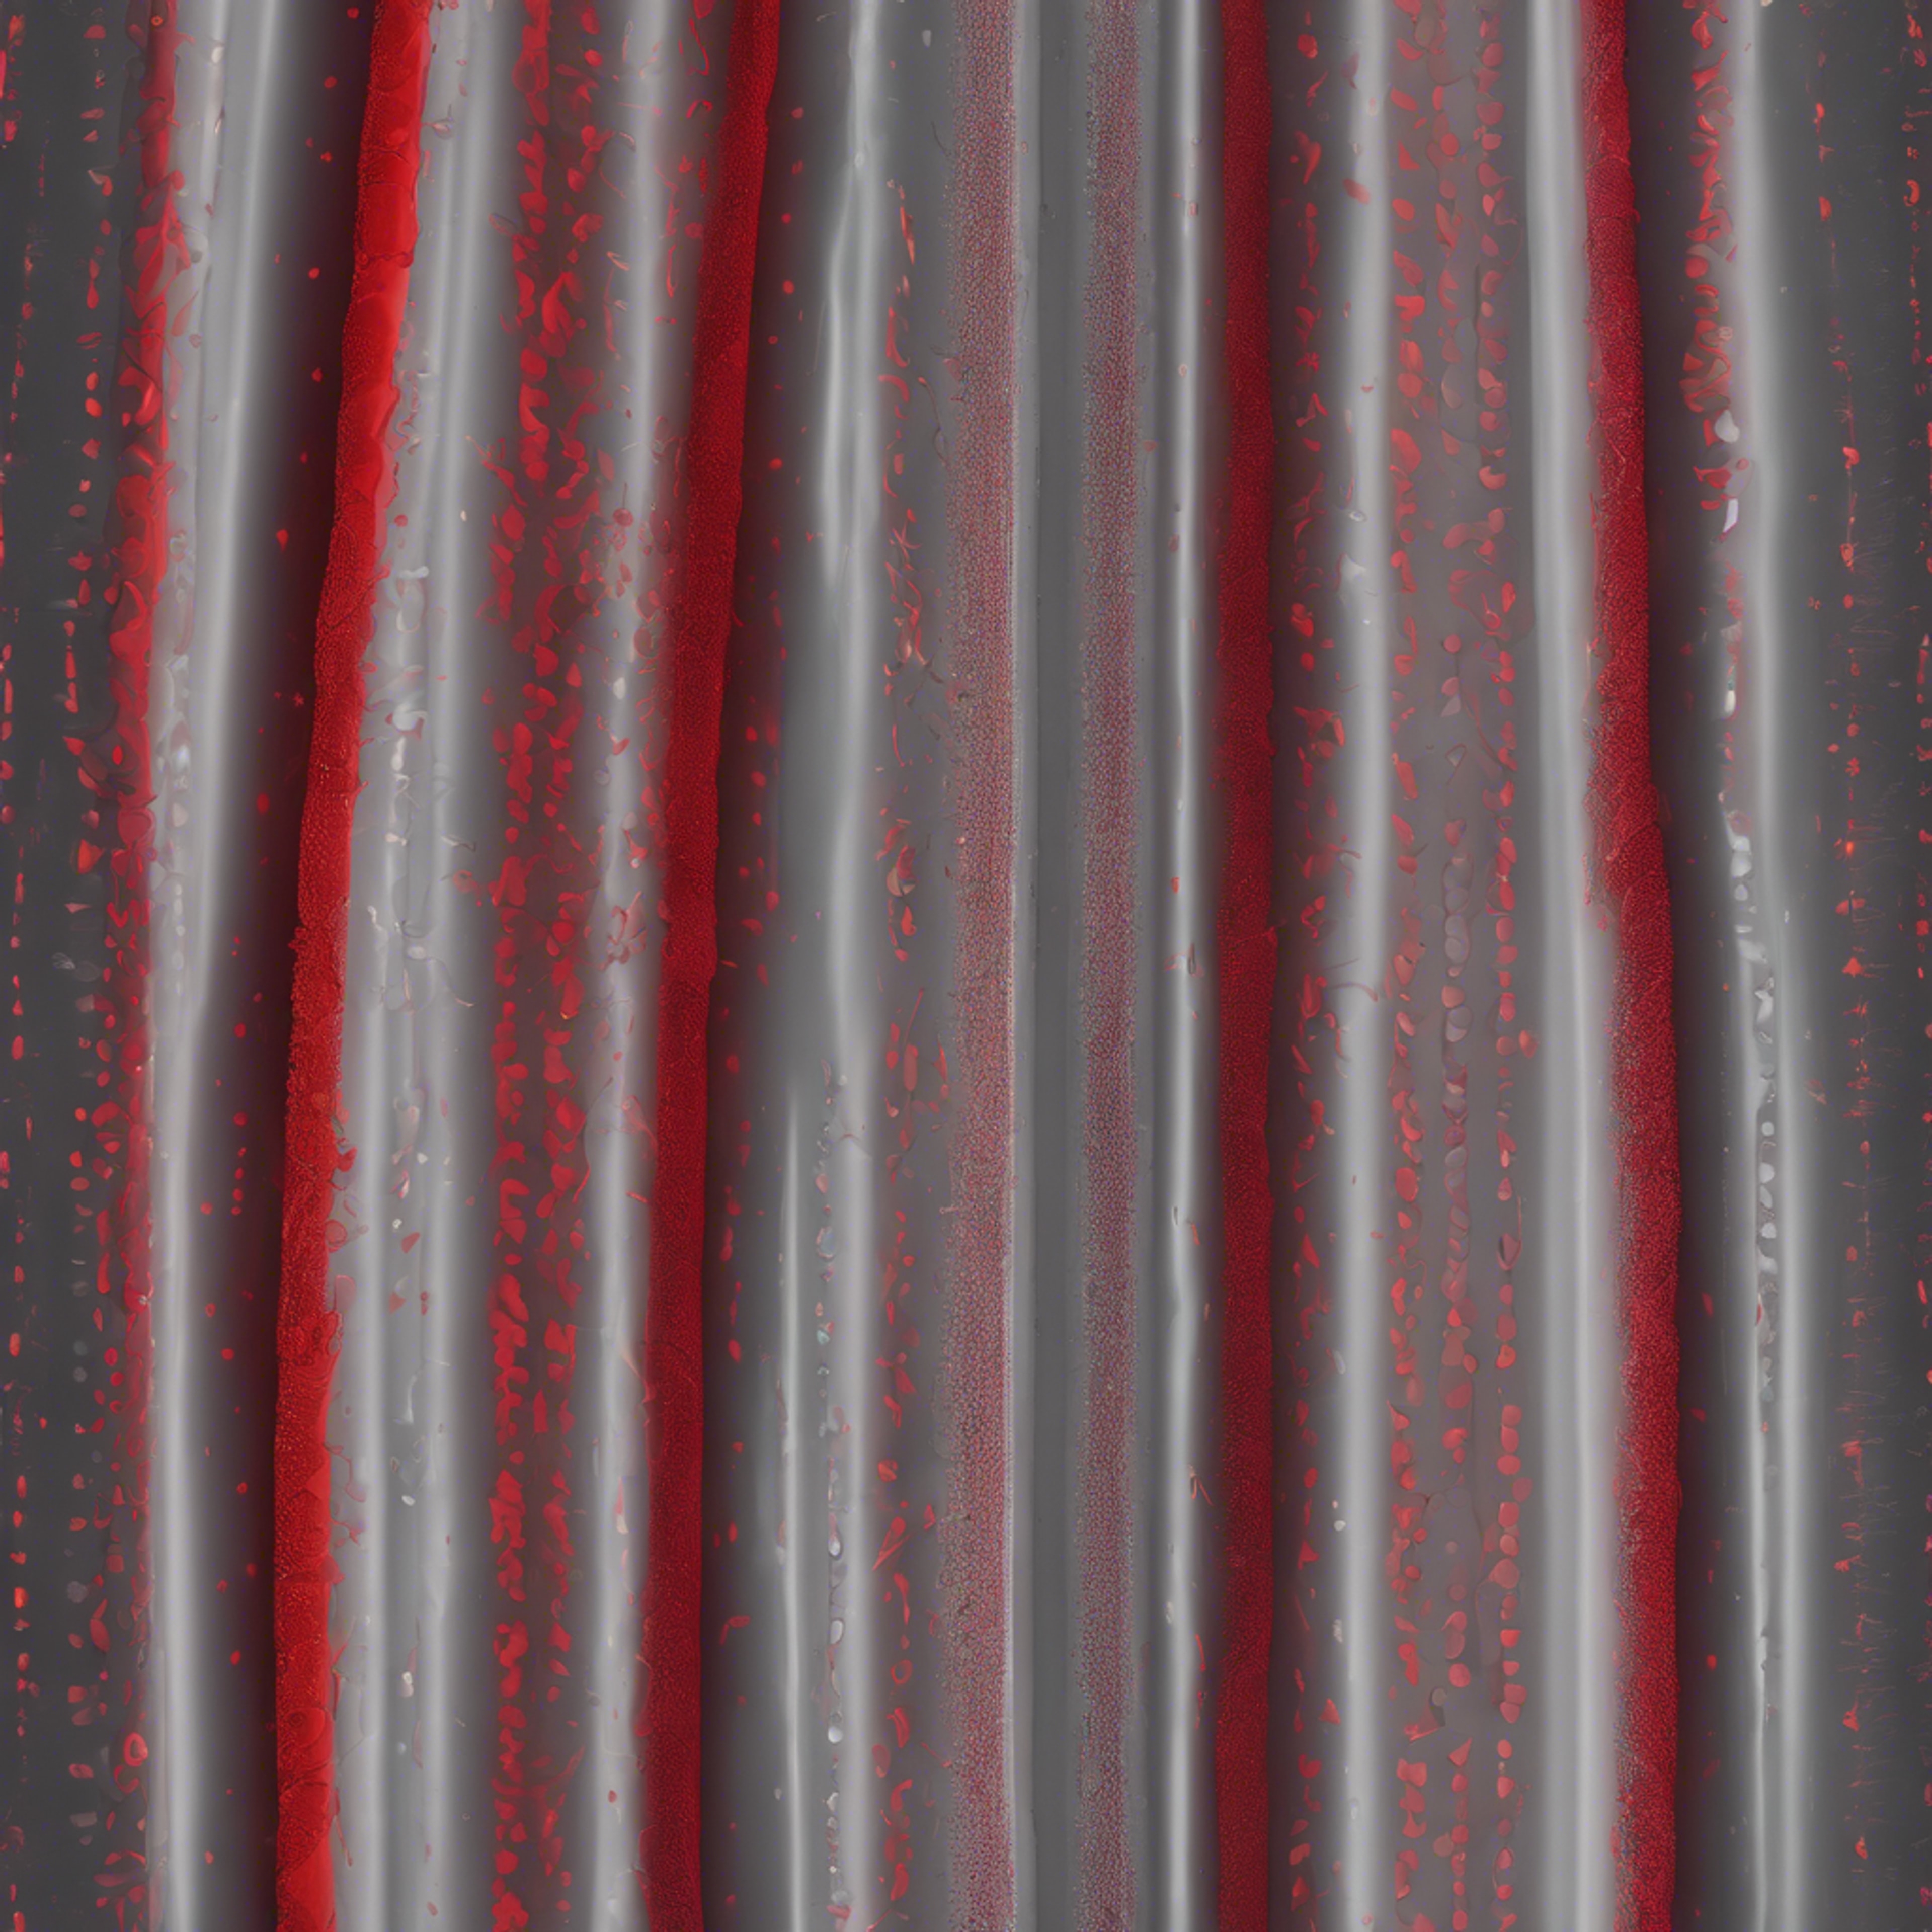 An abstract pattern with hallucinogenic red and grey gradients blending into each other. Дэлгэцийн зураг[5c97b162f4f748b39a07]